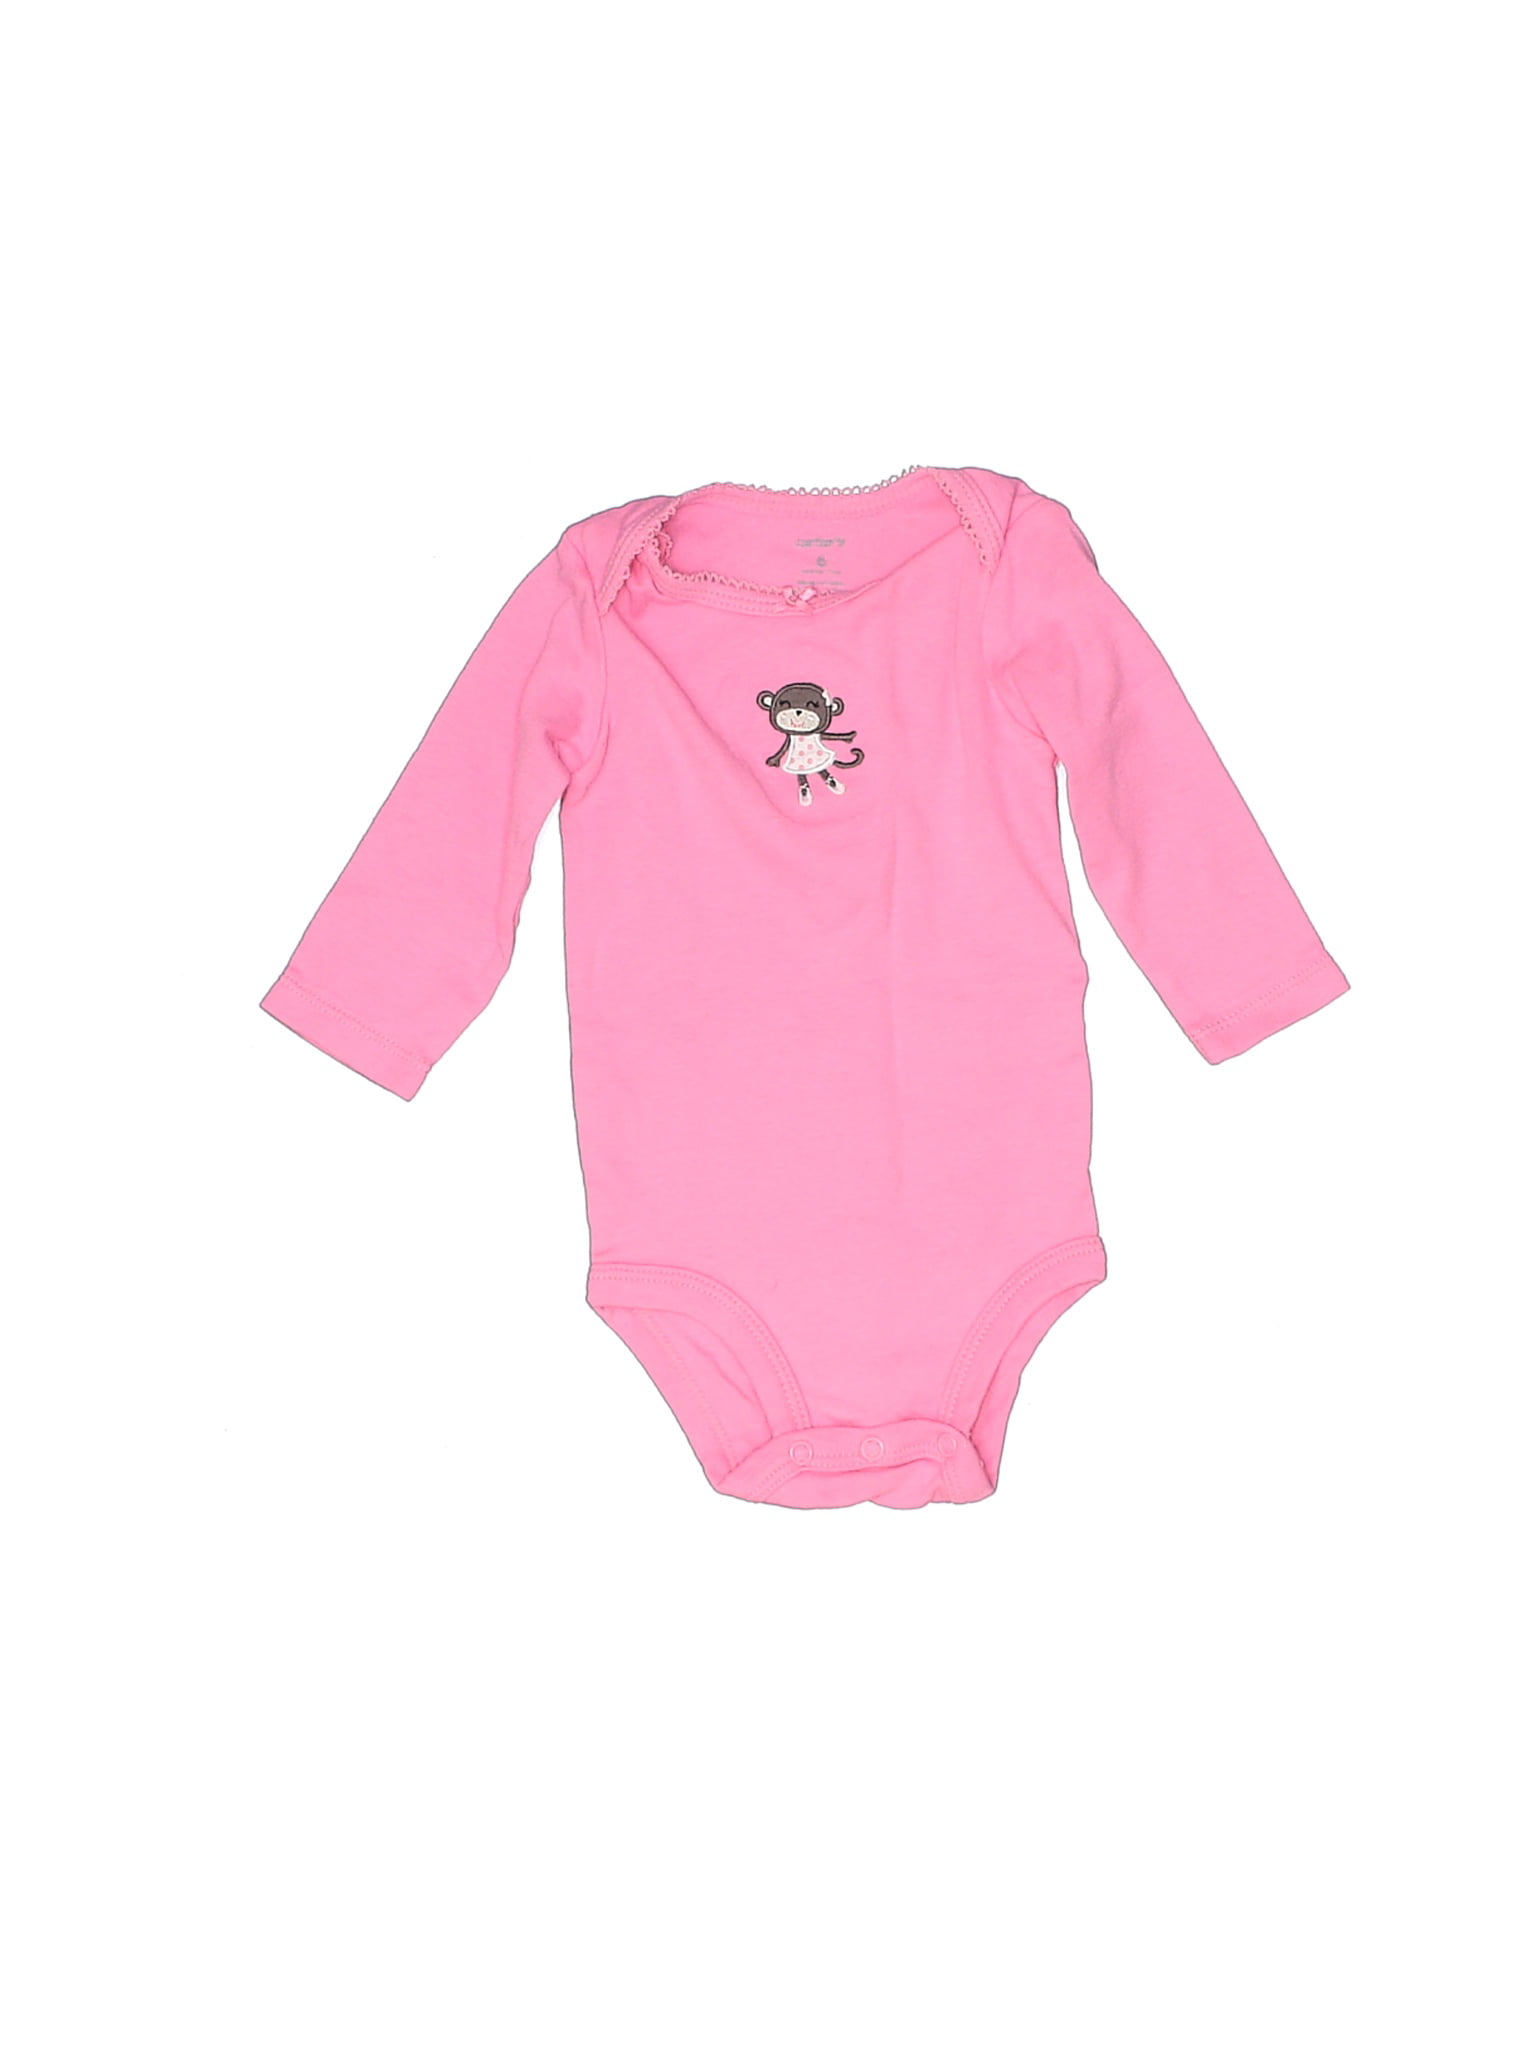 John Deere Baby Girl Logo Coverall One Piece Pink